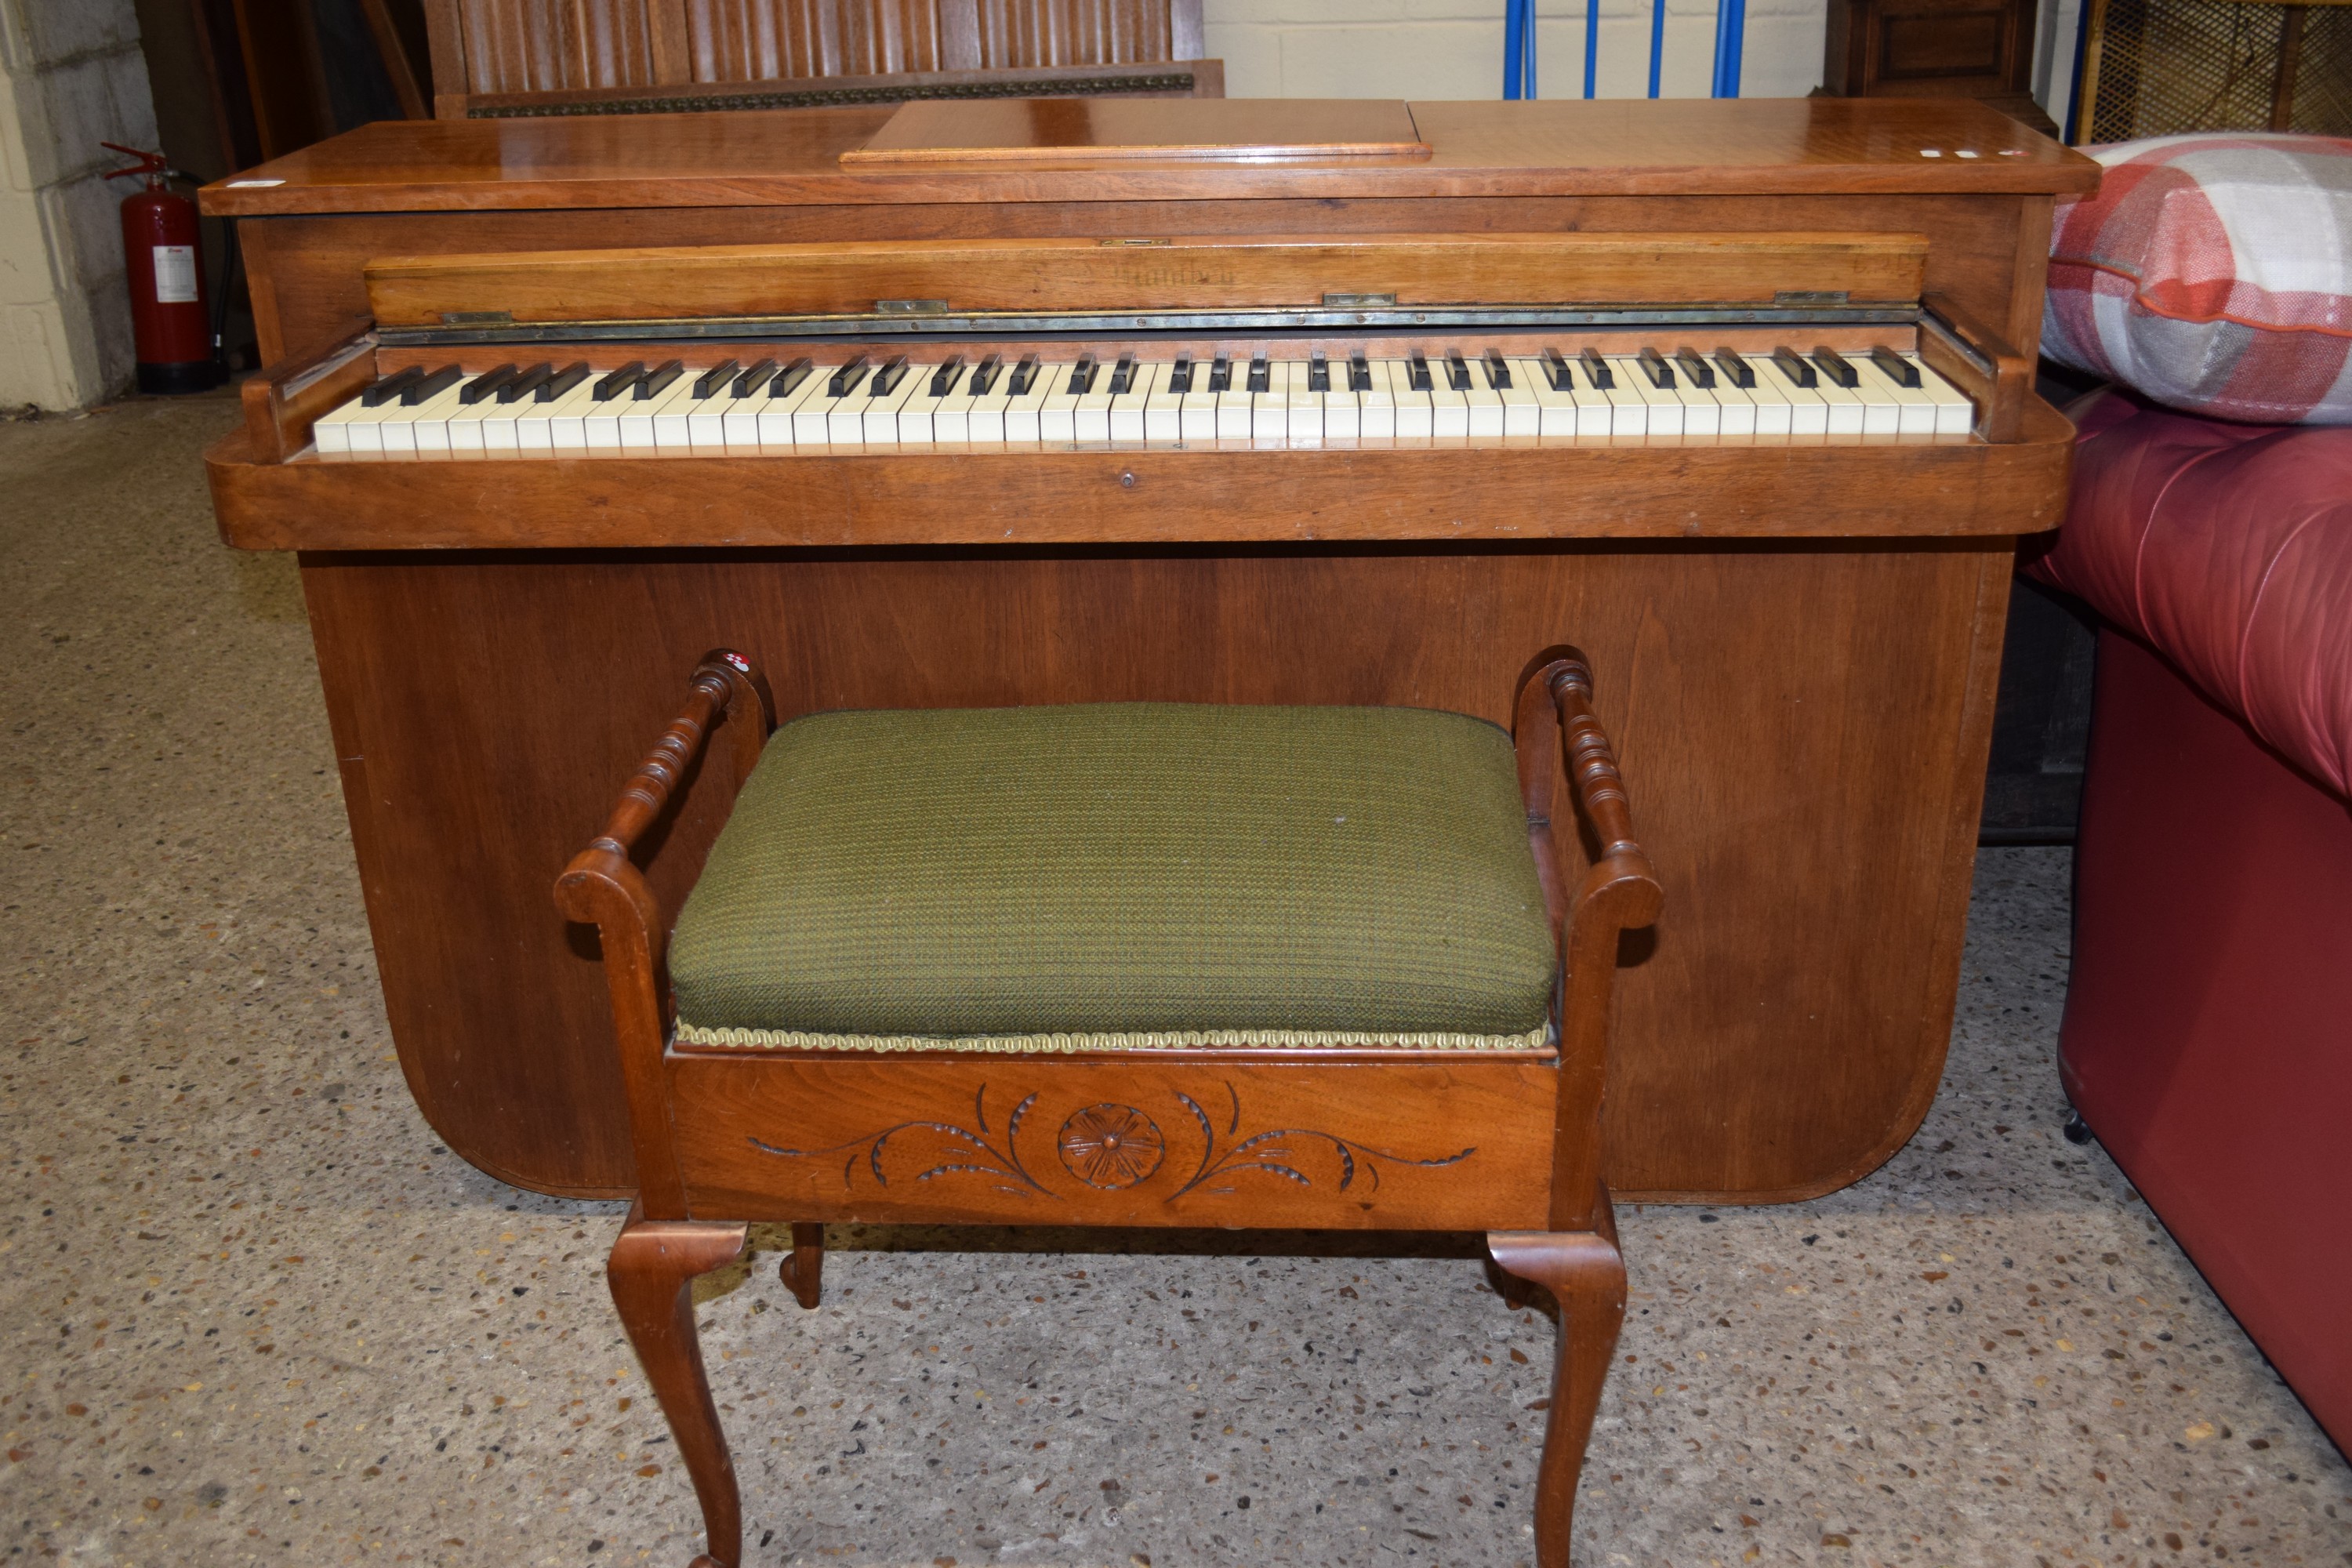 CIRCA 1930S COMPACT PIANO IN ART DECO STYLE CASE, INDISTINCT MAKERS/RETAILERS NAME, WIDTH APPROX